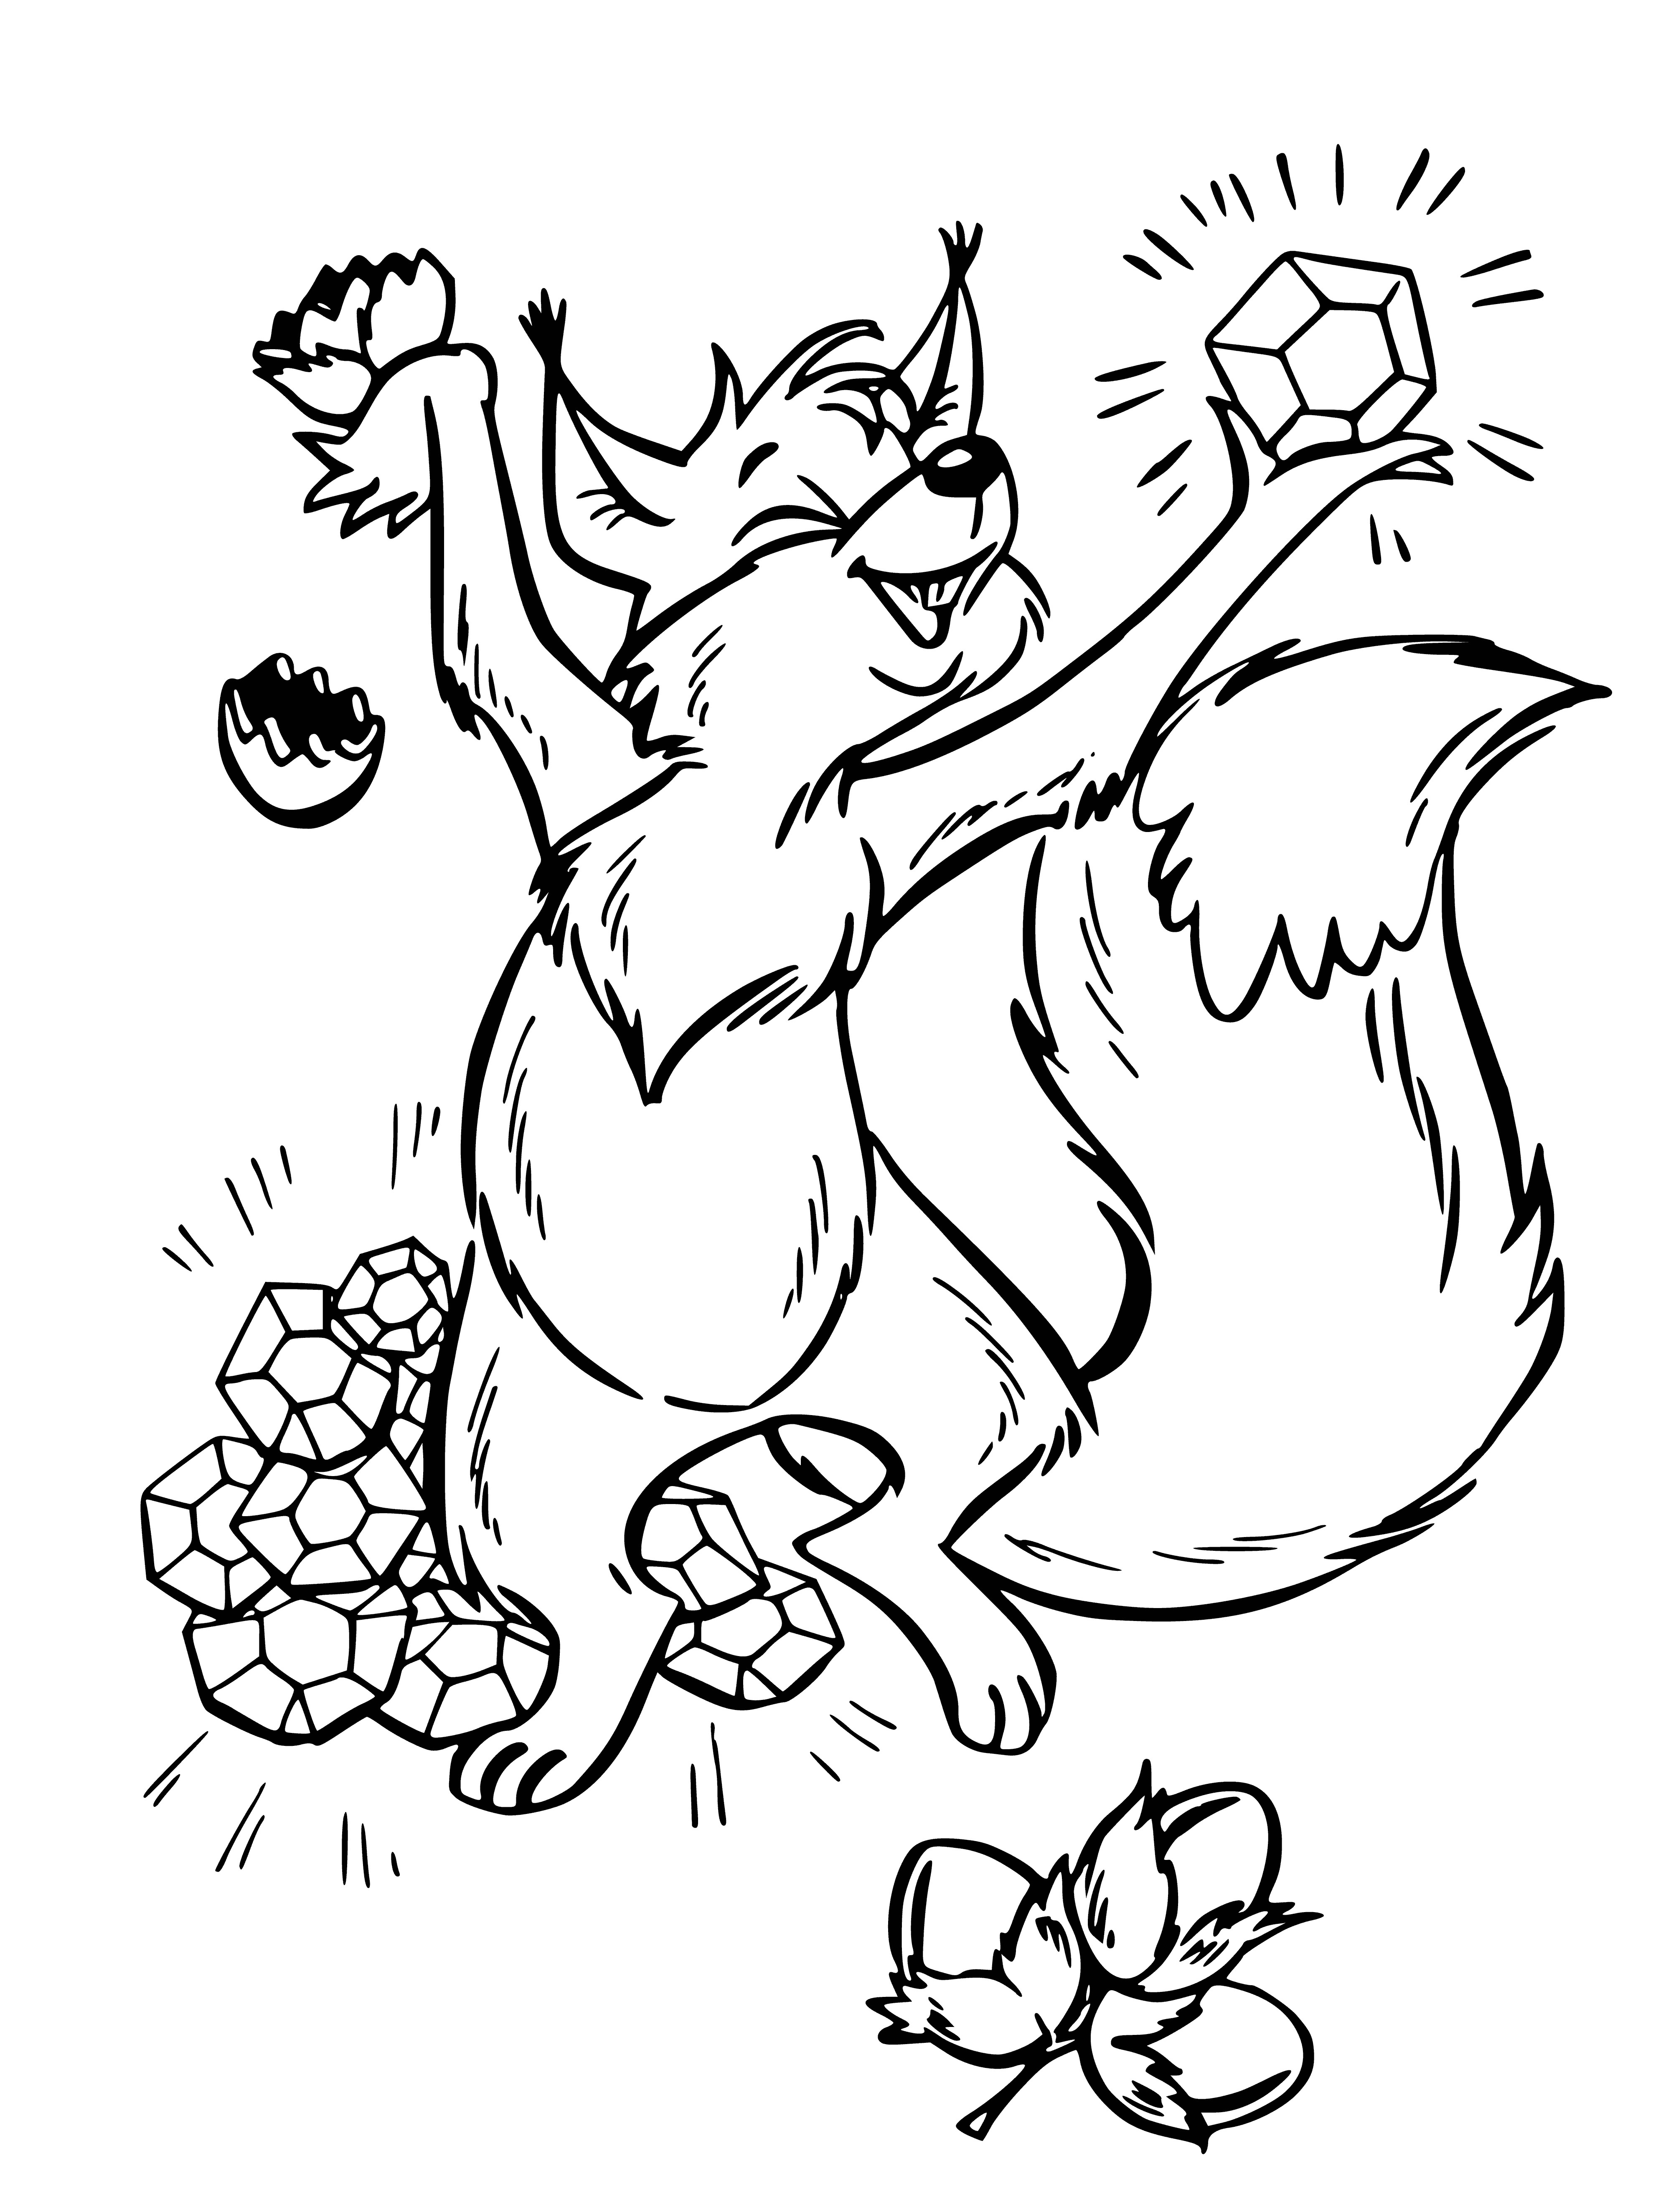 coloring page: A squirrel sits on a tree branch, barking on some nuts, with its tail in the air. Leaves and other branches are nearby.